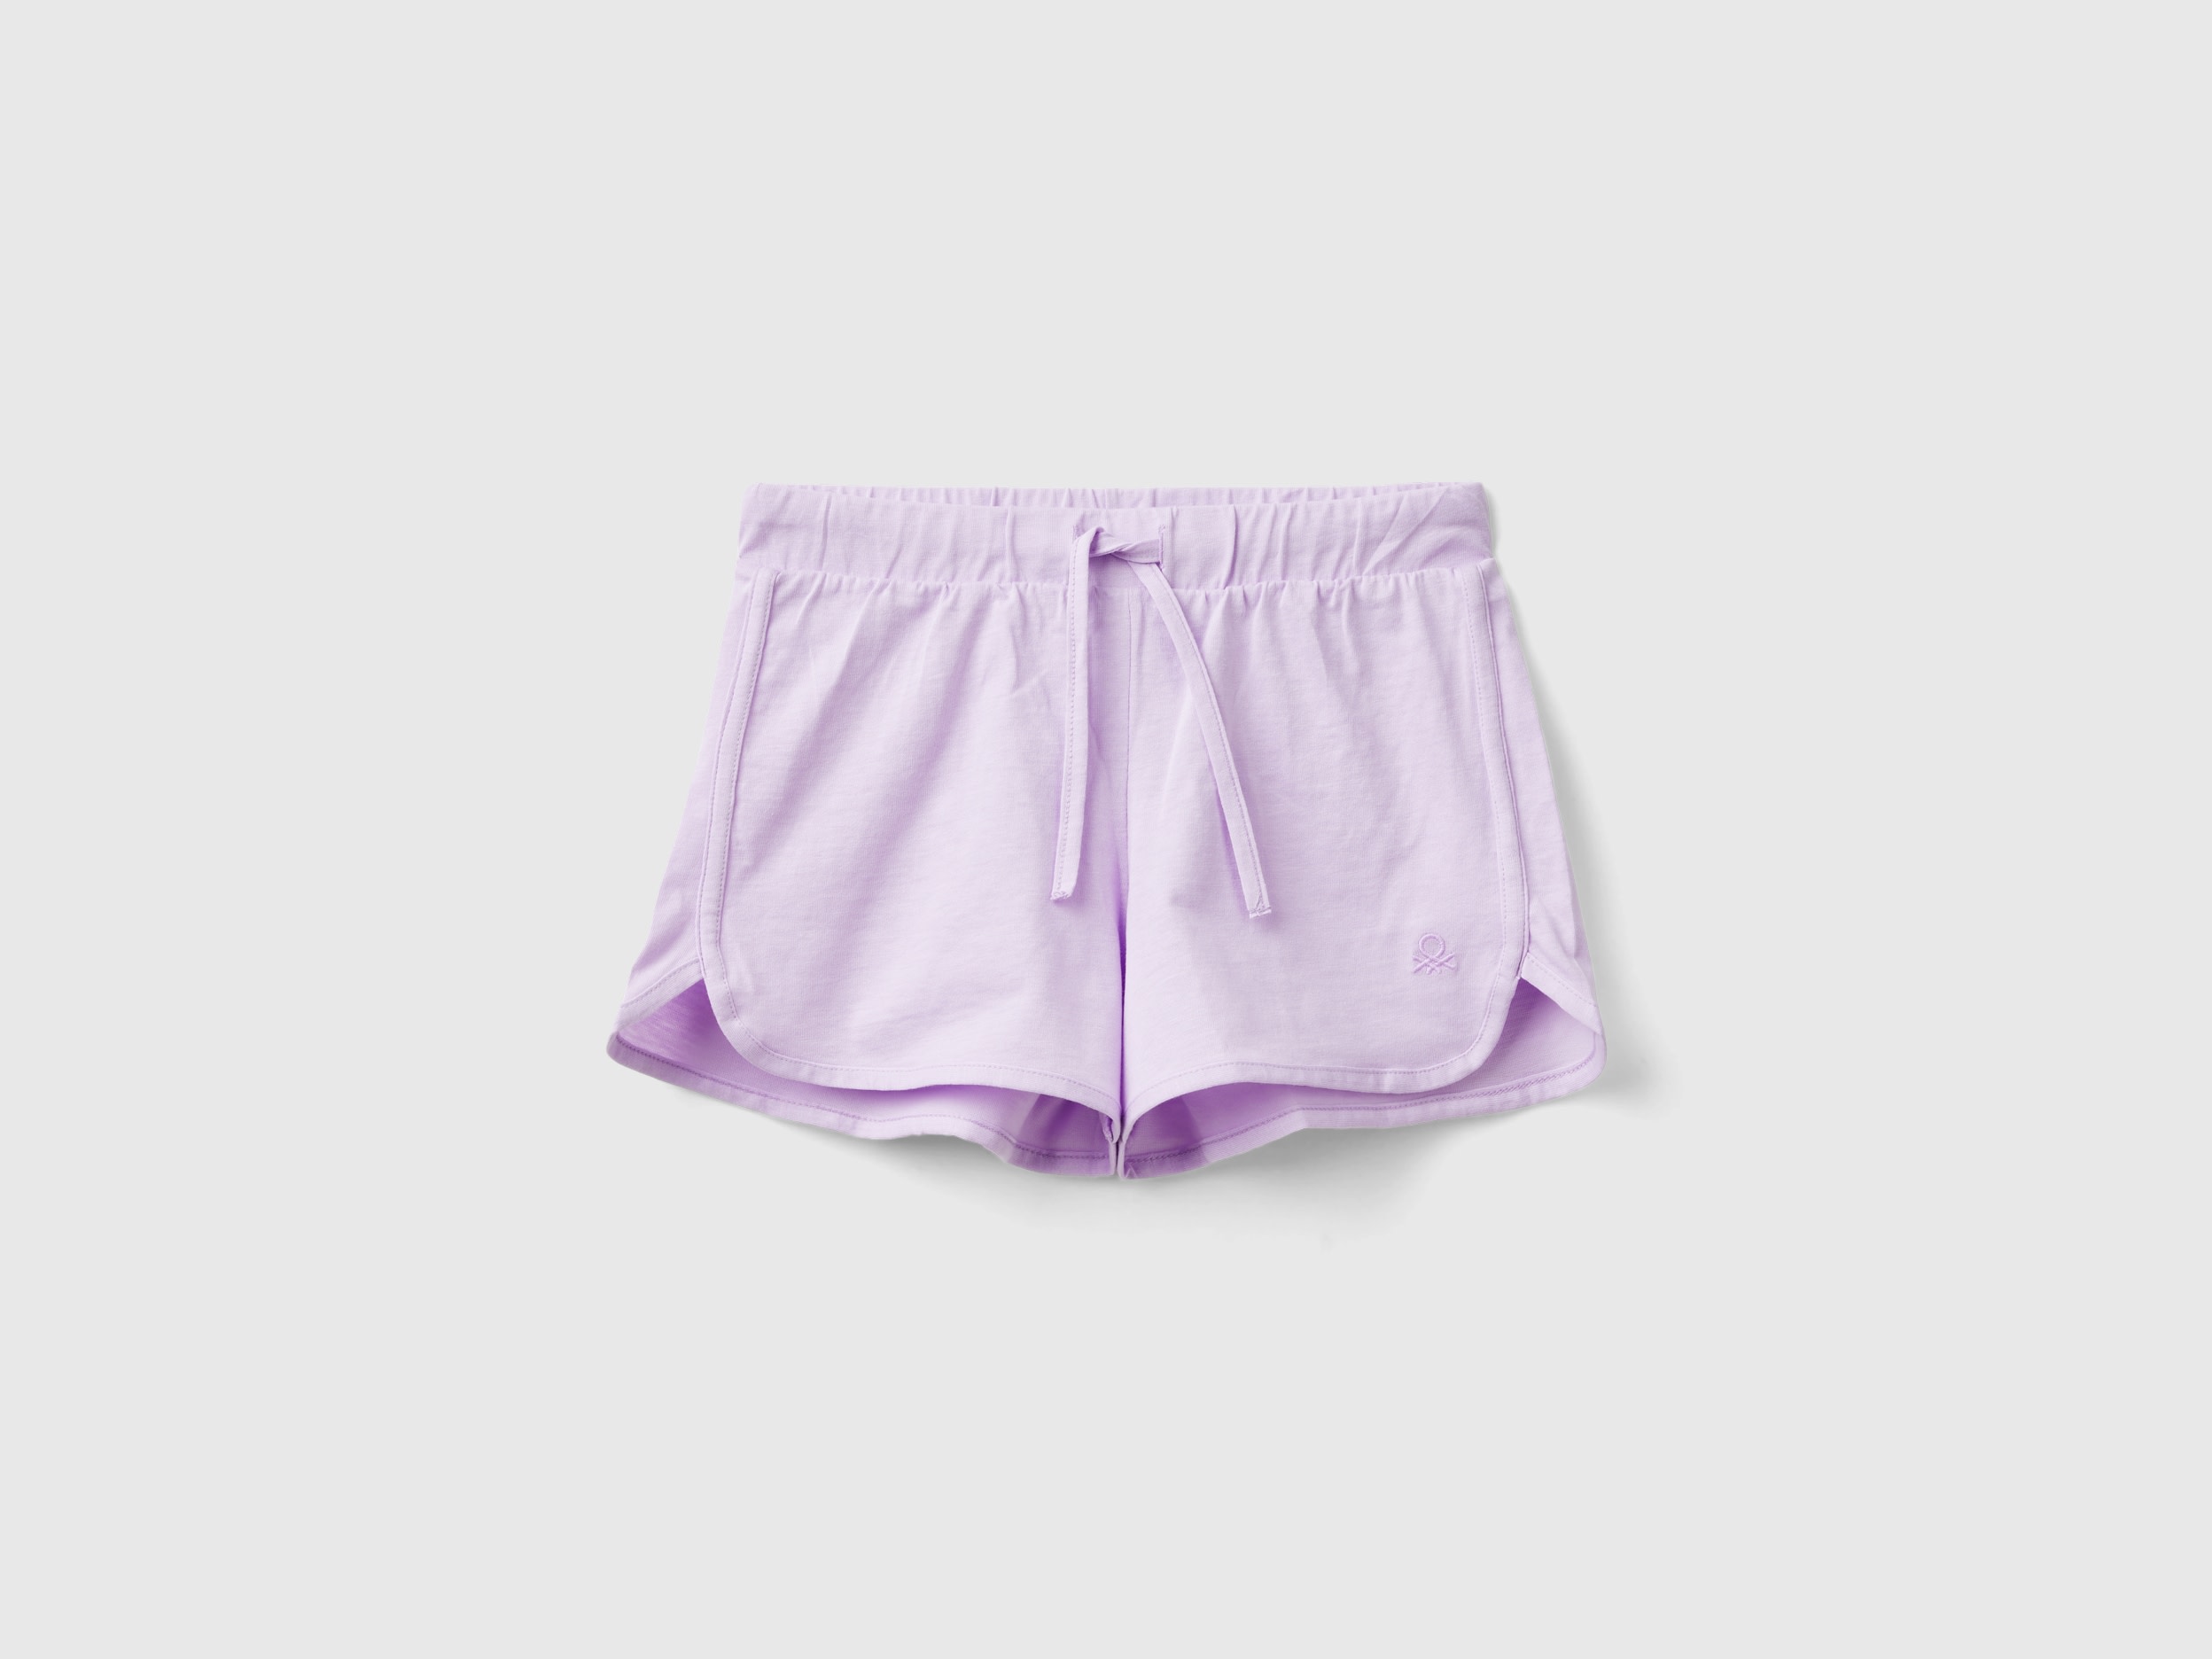 Image of Benetton, Runner Style Shorts In Organic Cotton, size 2XL, Lilac, Kids